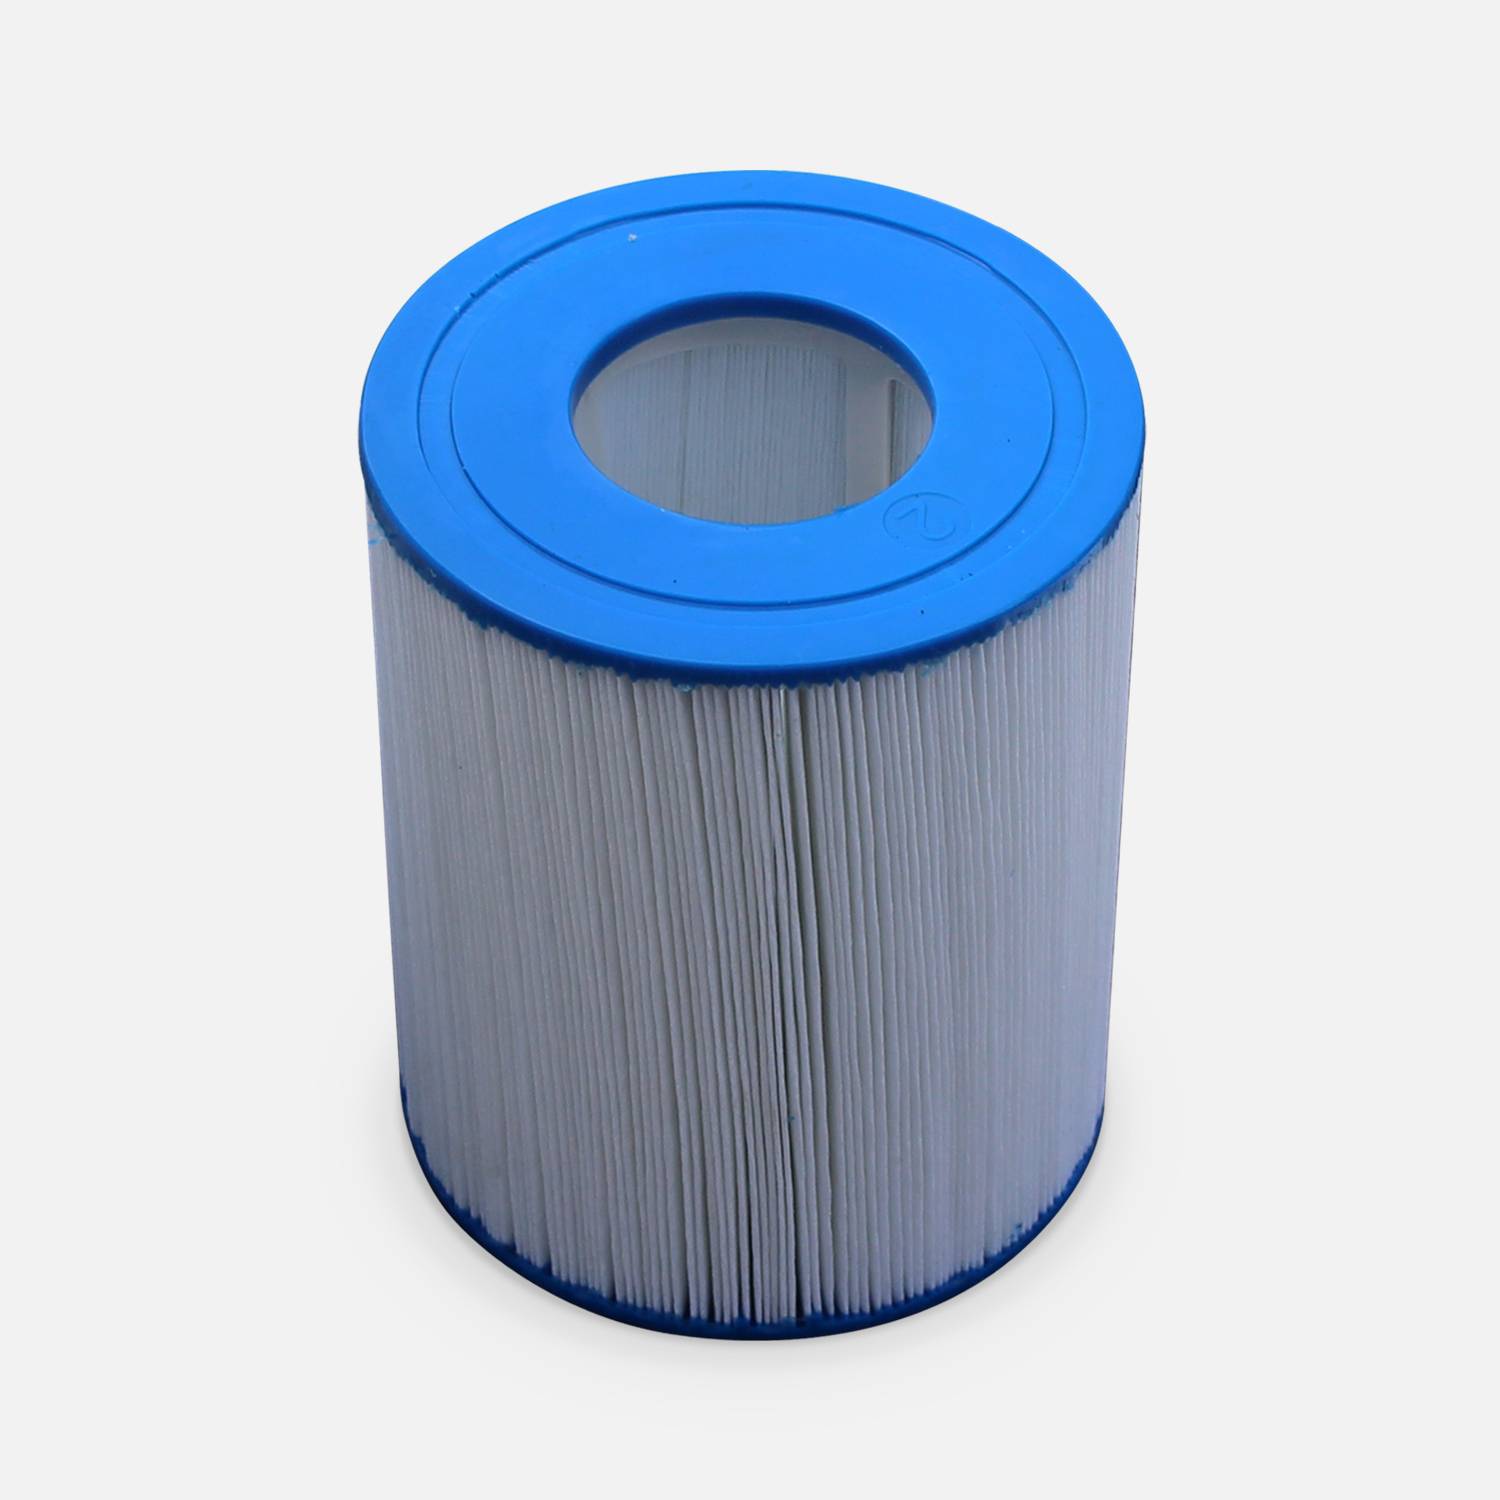 Type 2 filter cartridge for pool pump - Ø106 x H136mm compatible with 2006L/h and 3028L/h filters. Photo1